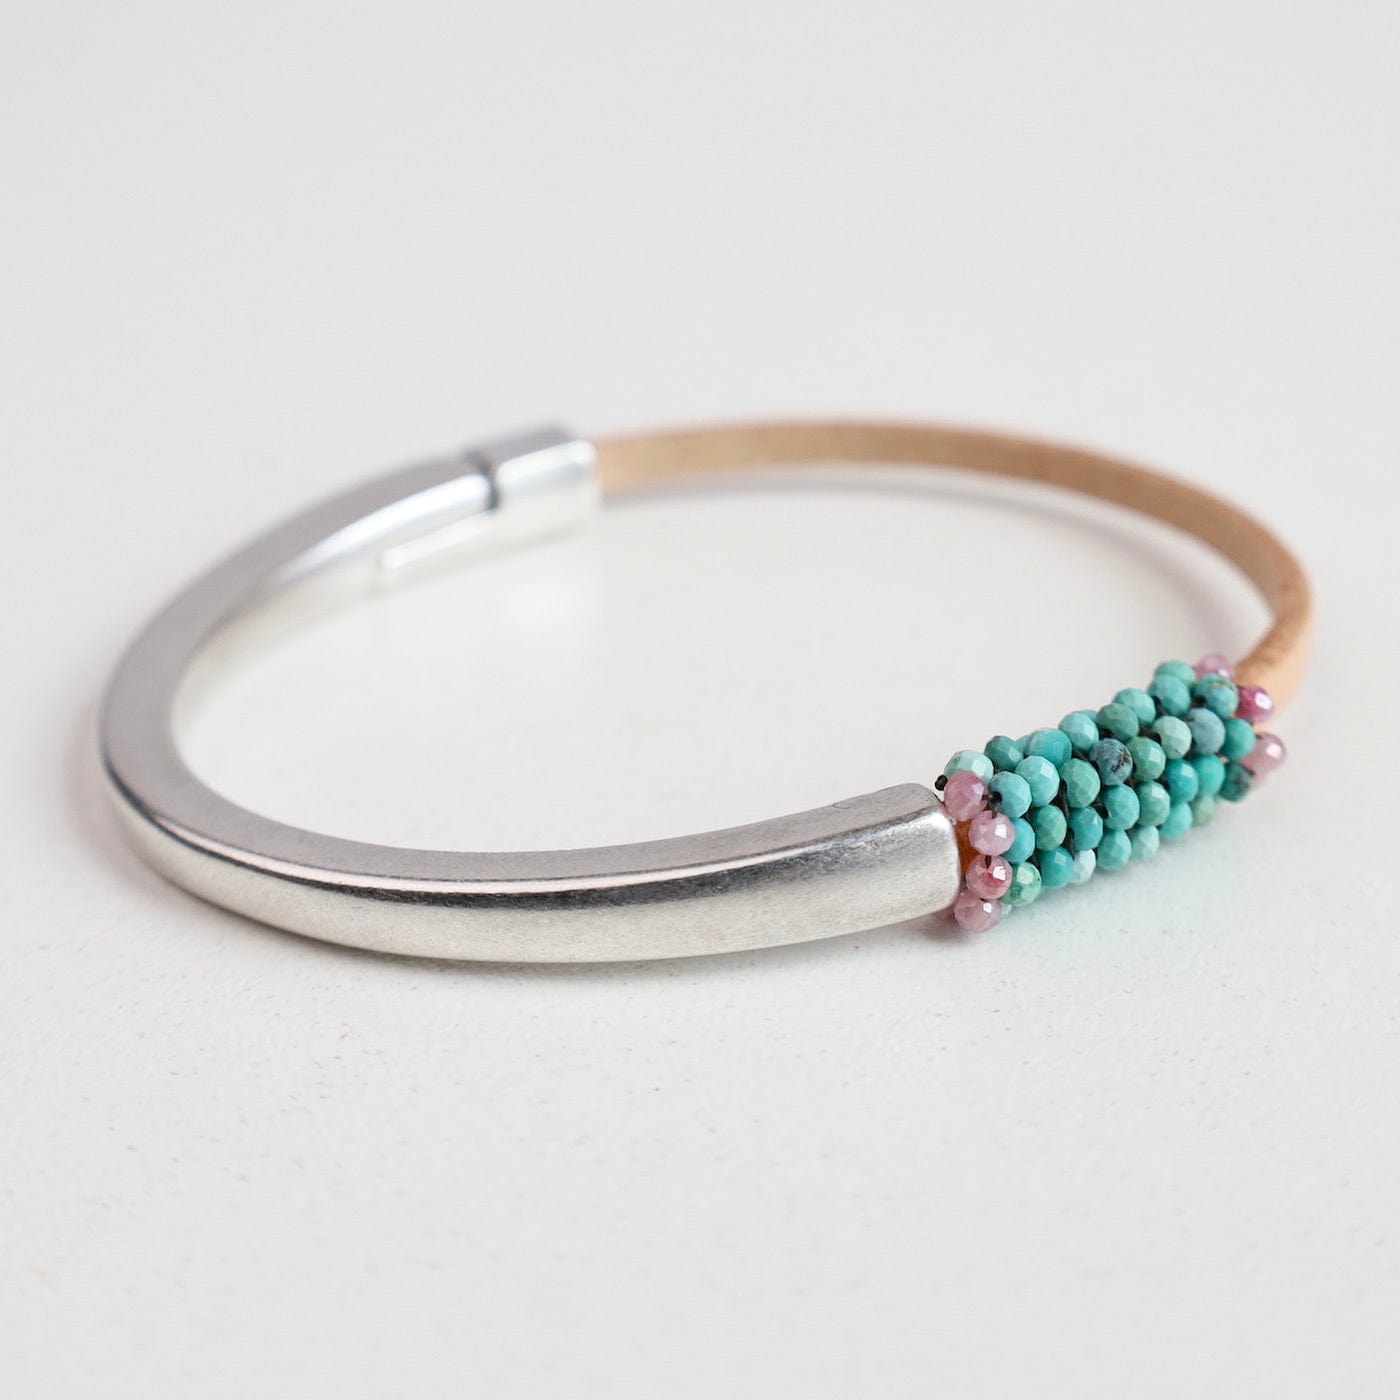 BRC-JM Hand Stitched Tiny Natural Turquoise 1/2 Cuff